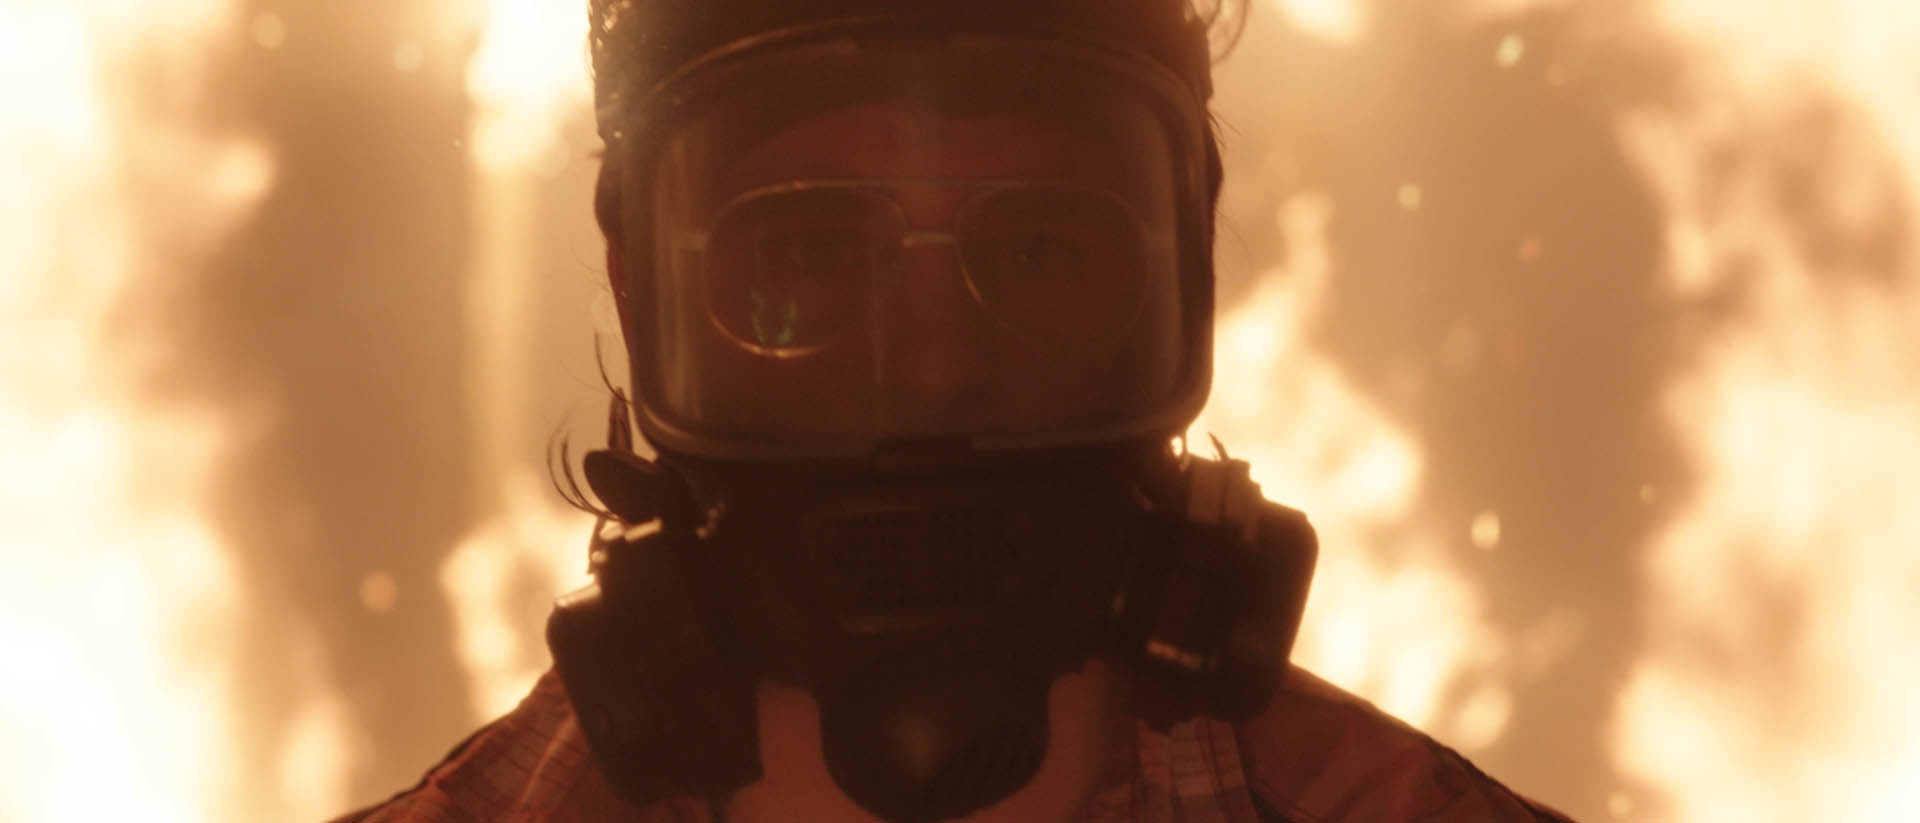 How ActionVFX Elements Helped Ignite the World of 'Waco'